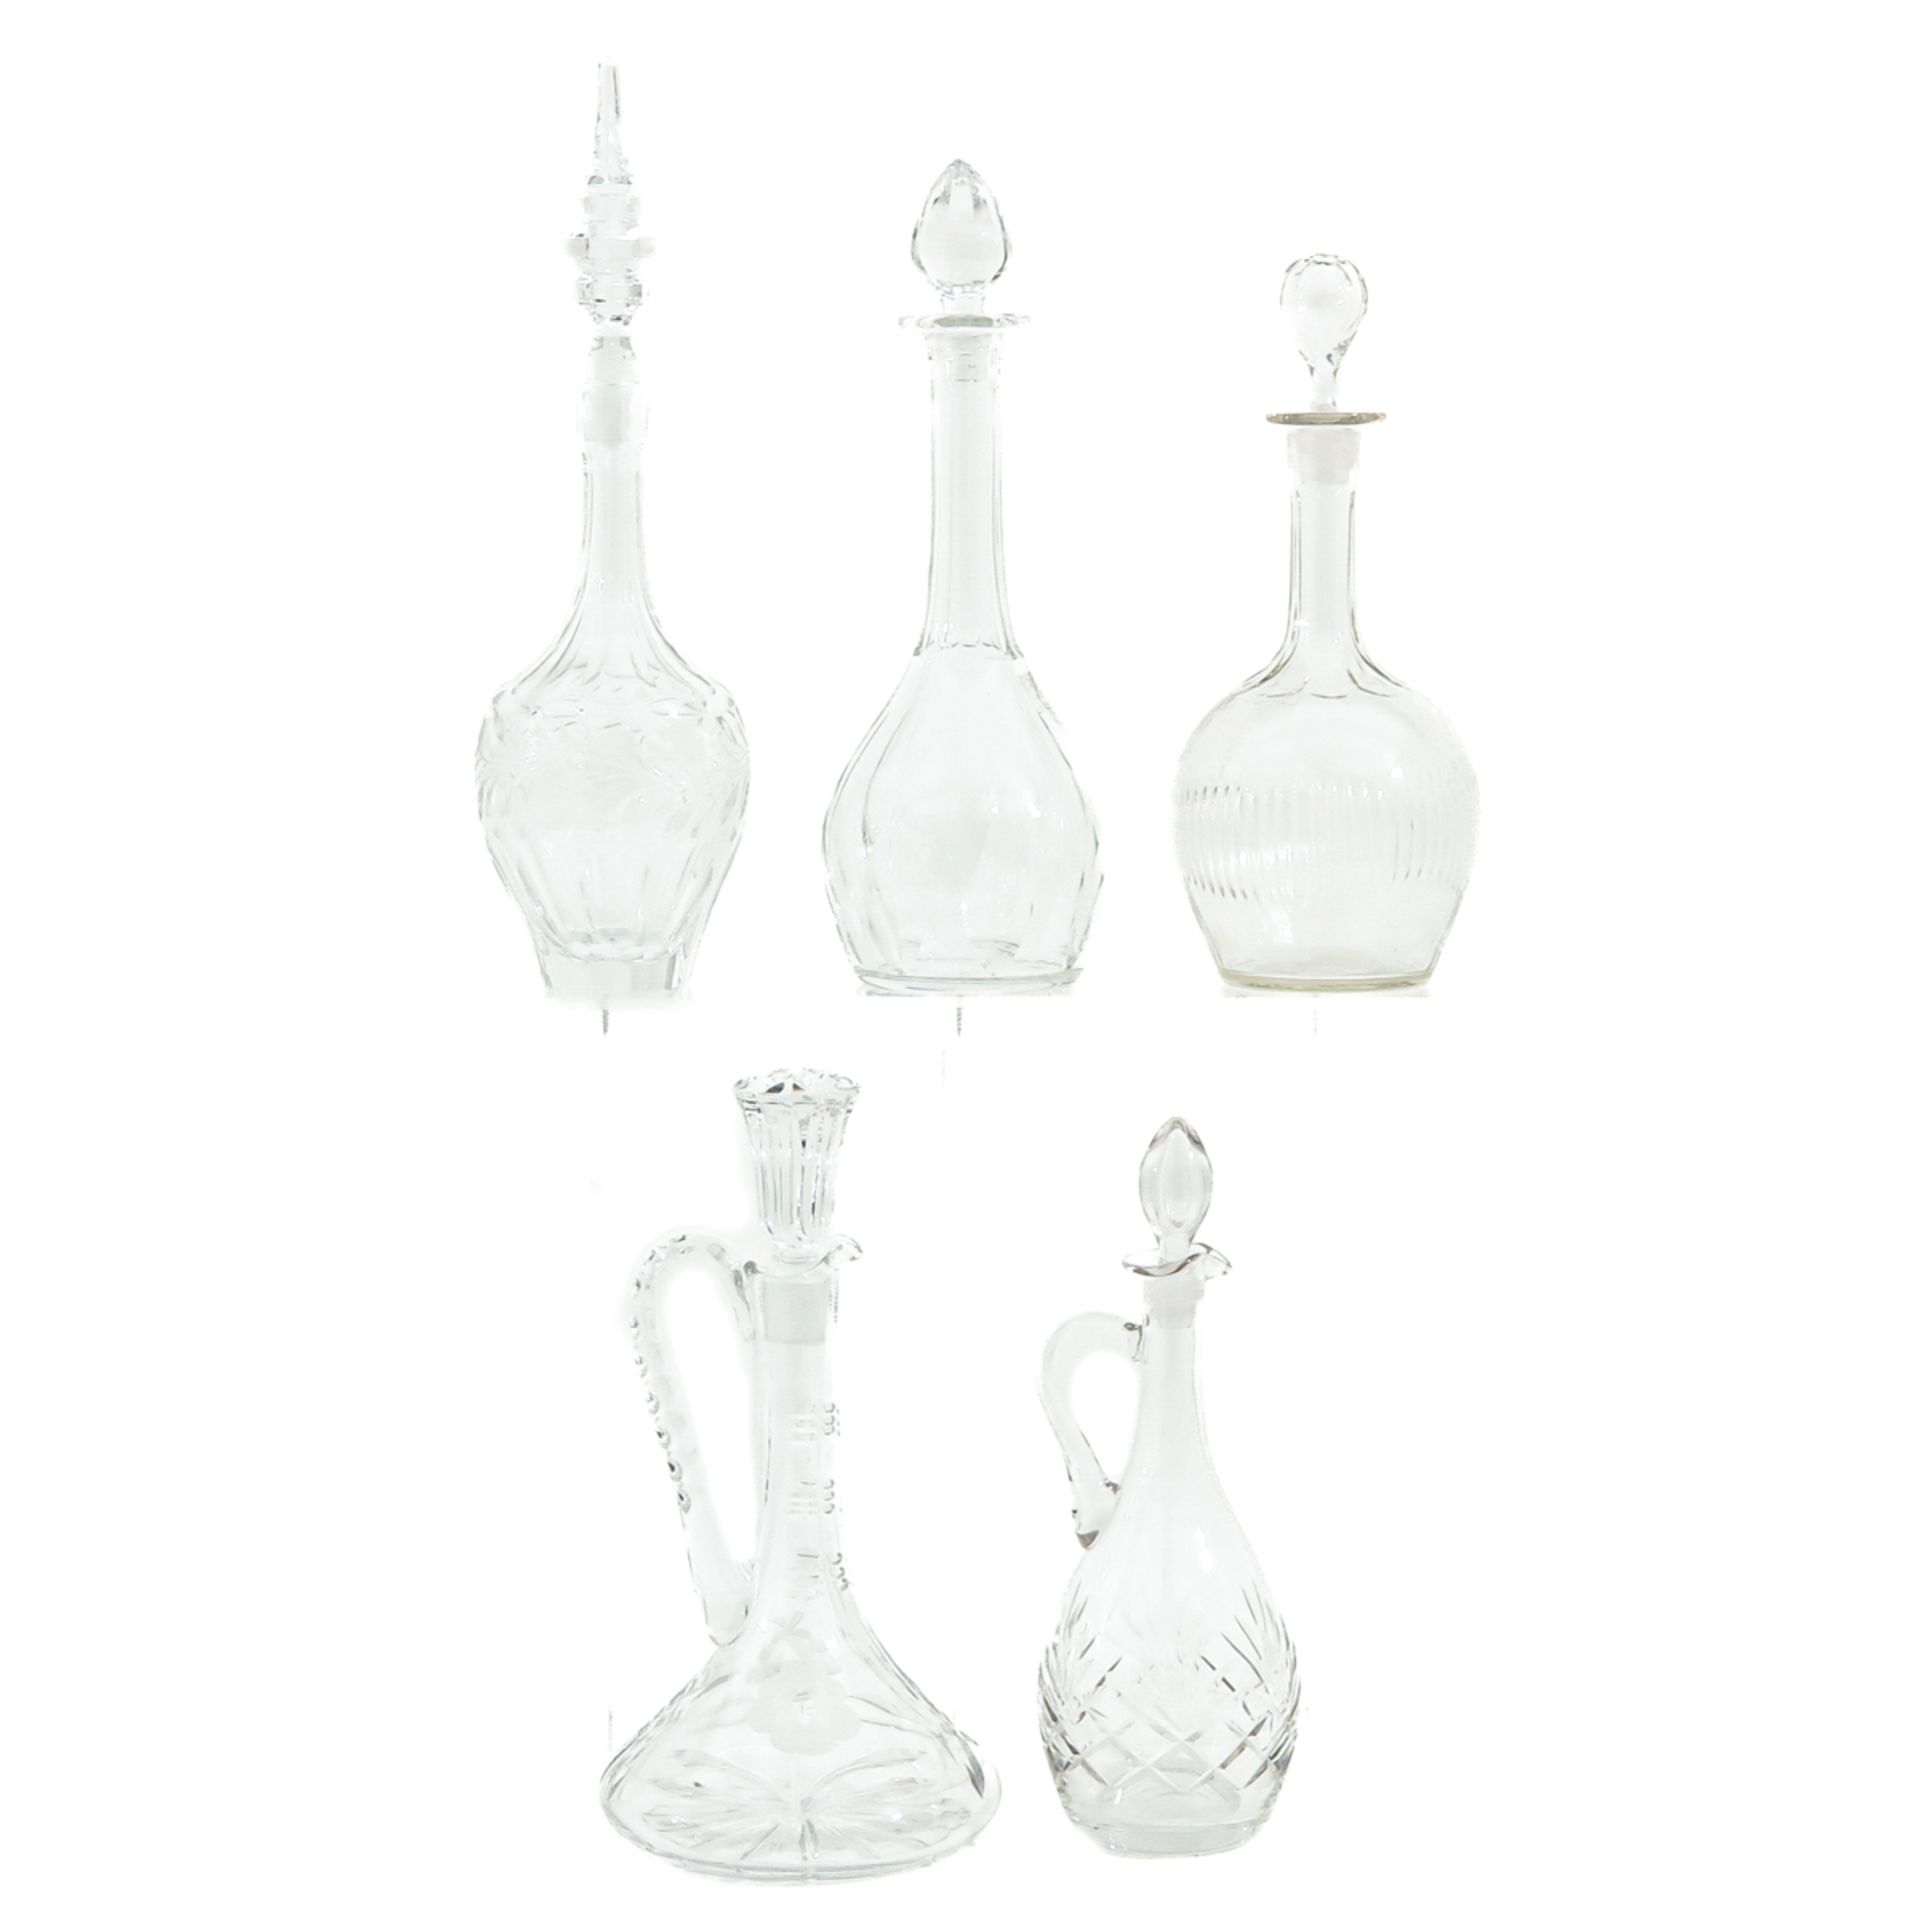 A Collection of Decanters - Image 3 of 10